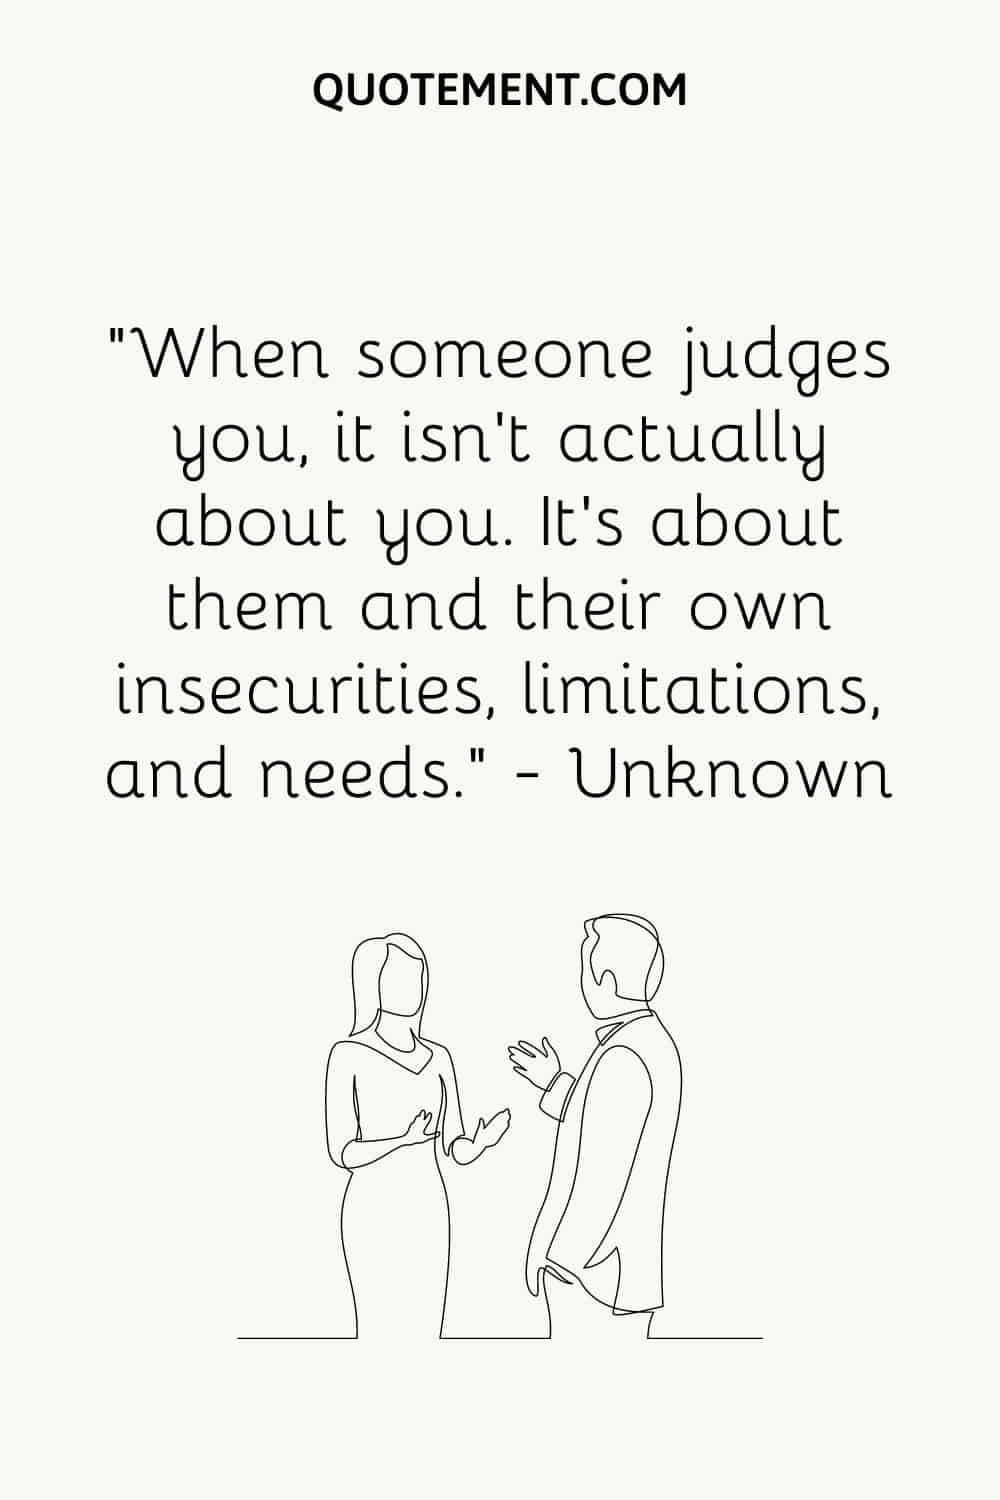 “When someone judges you, it isn’t actually about you. It’s about them and their own insecurities, limitations, and needs.” — Unknown